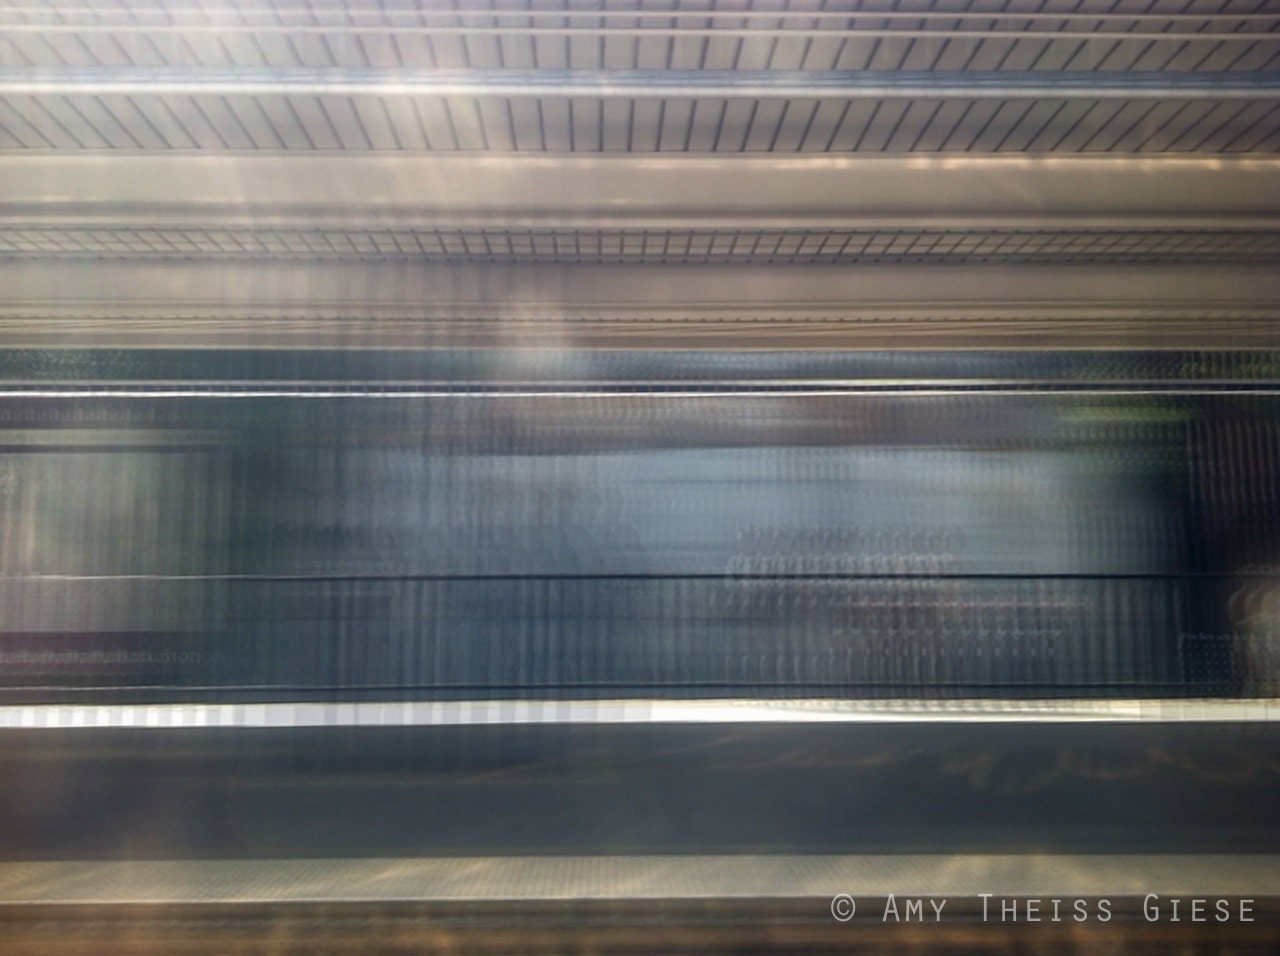 Linear Geometric Abstract Photography - 5x7 Blur, Blue, Gray, Lines, Movement - atgiese